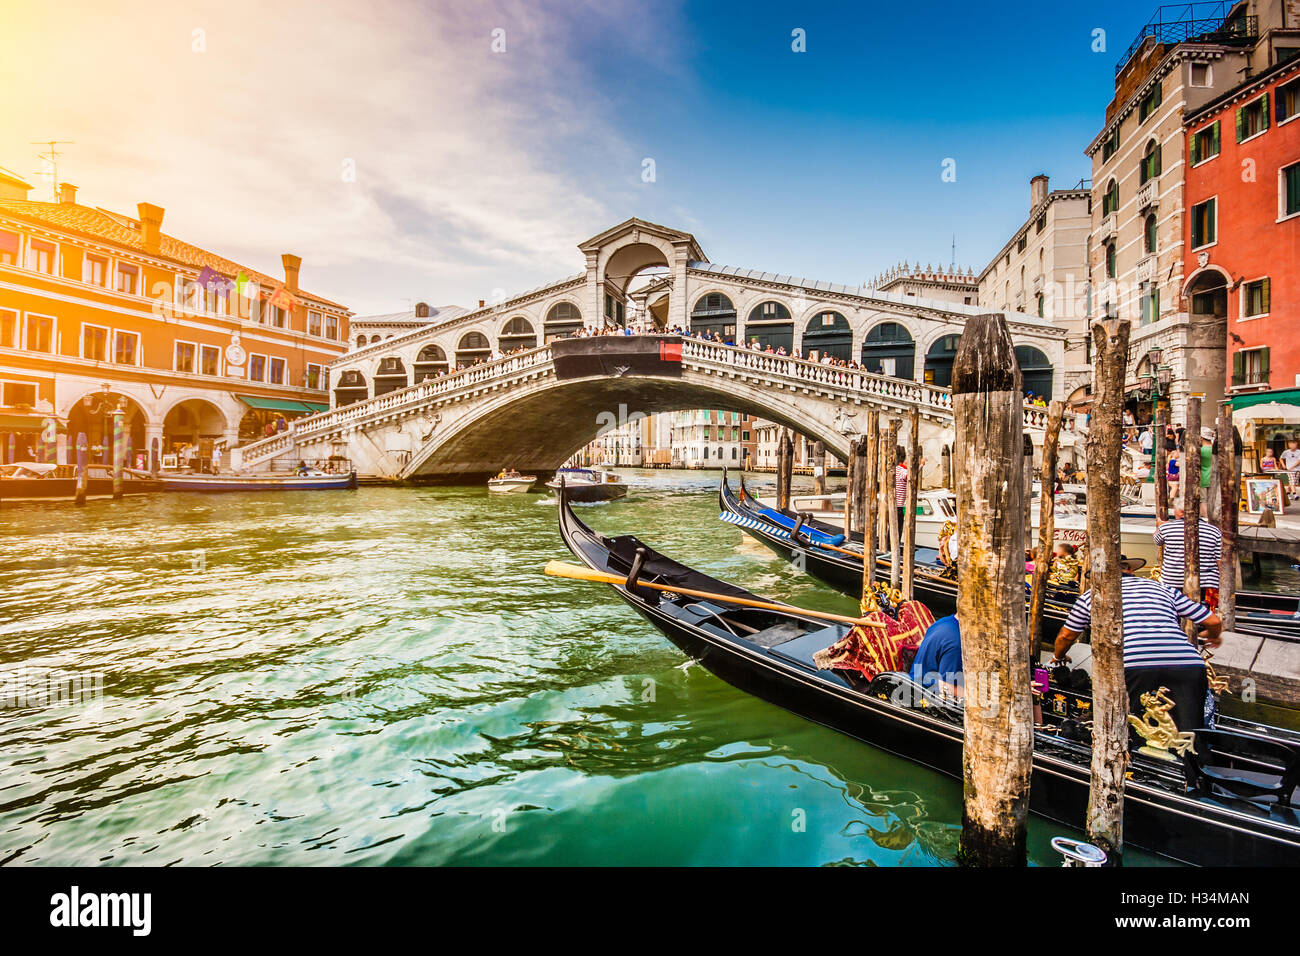 Classic view of traditional Gondolas on famous Canal Grande with famous Rialto Bridge at sunset in Venice, Italy Stock Photo